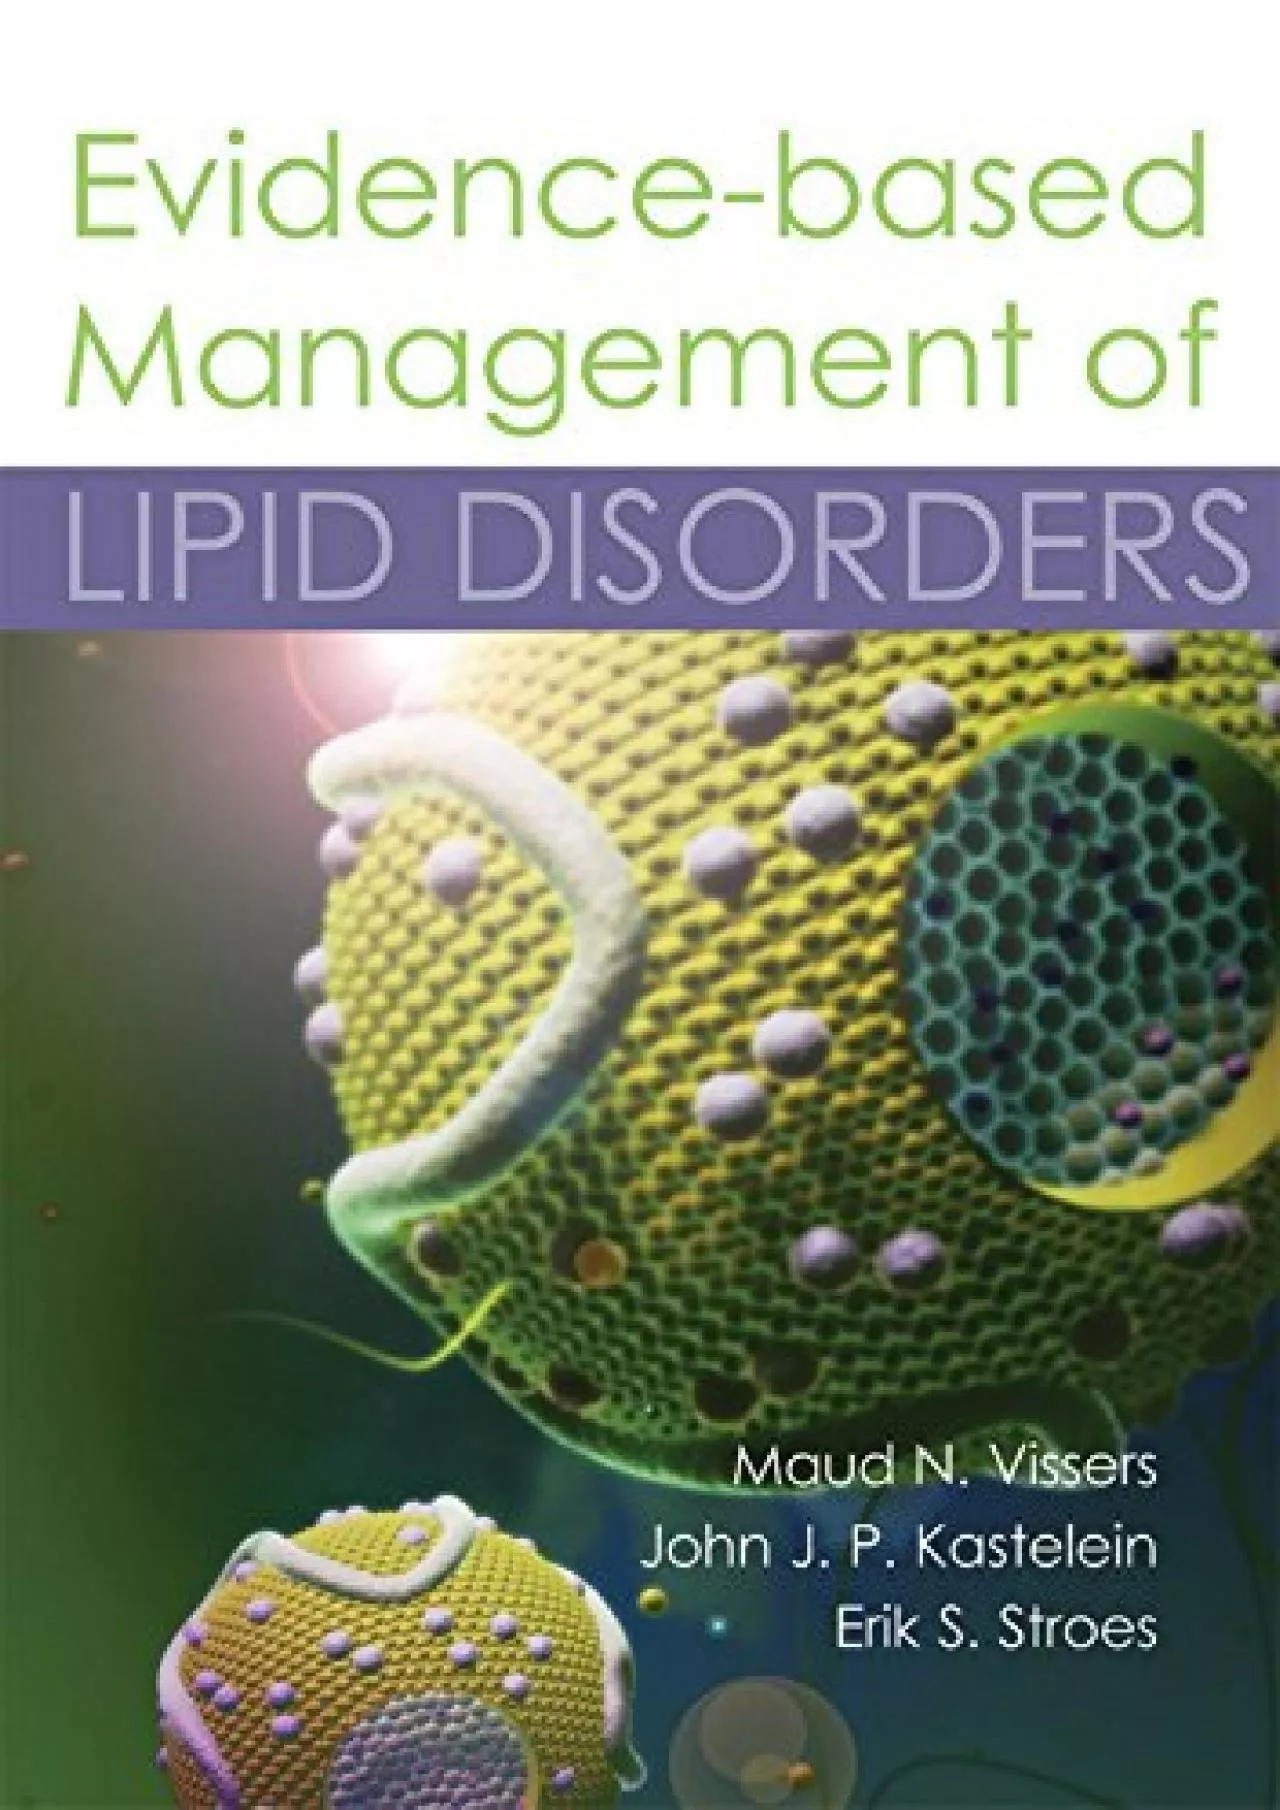 (BOOS)-Evidence-based Management of Lipid Disorders